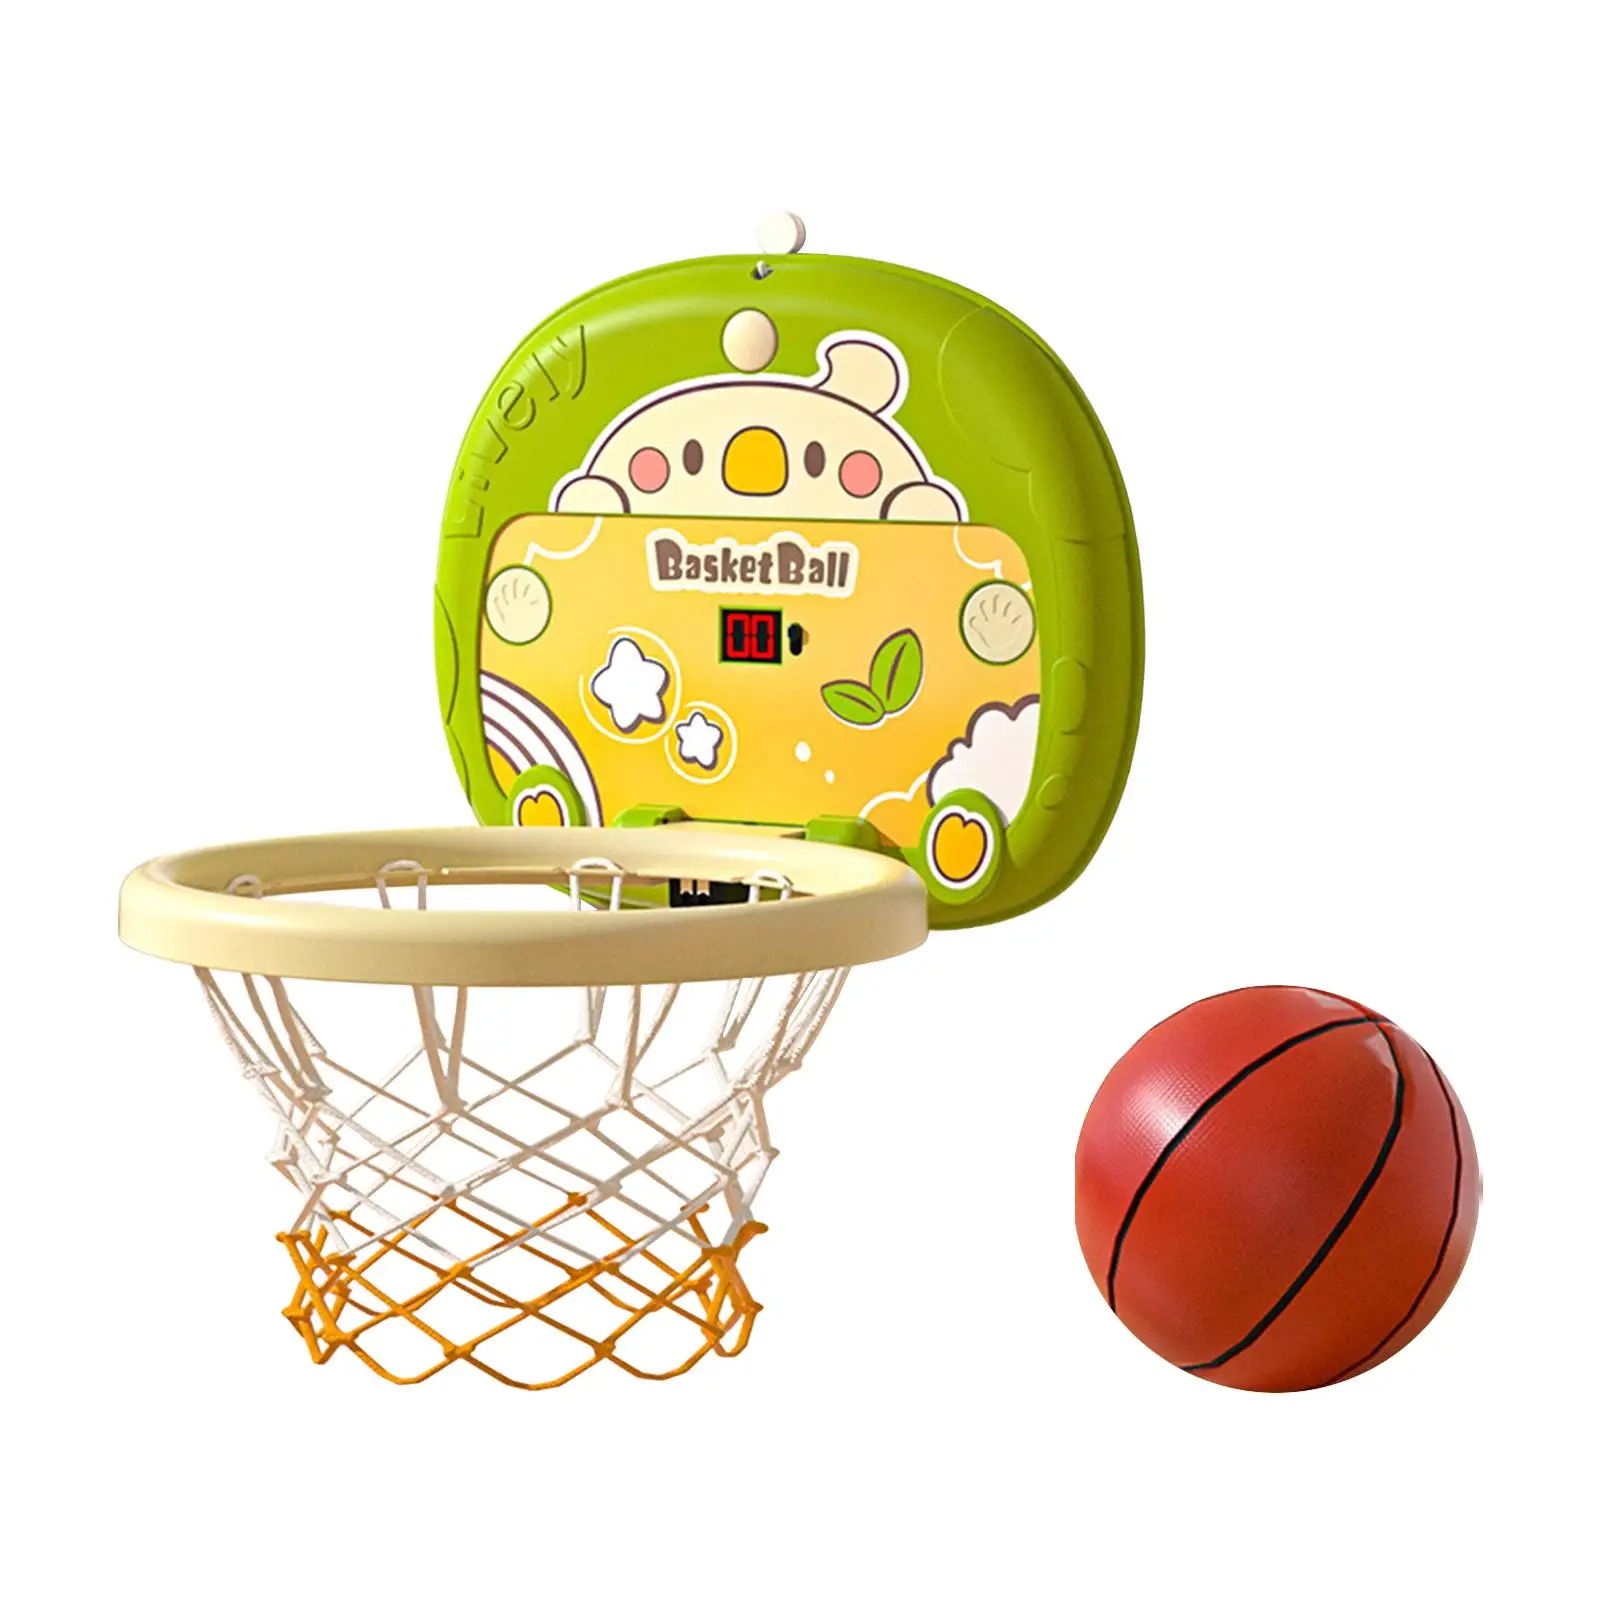 Mini Basketball Hoop Portable Children Plaything Foldable Sport Game Kids Sports Toys for Game Outside Kids Garden Playing